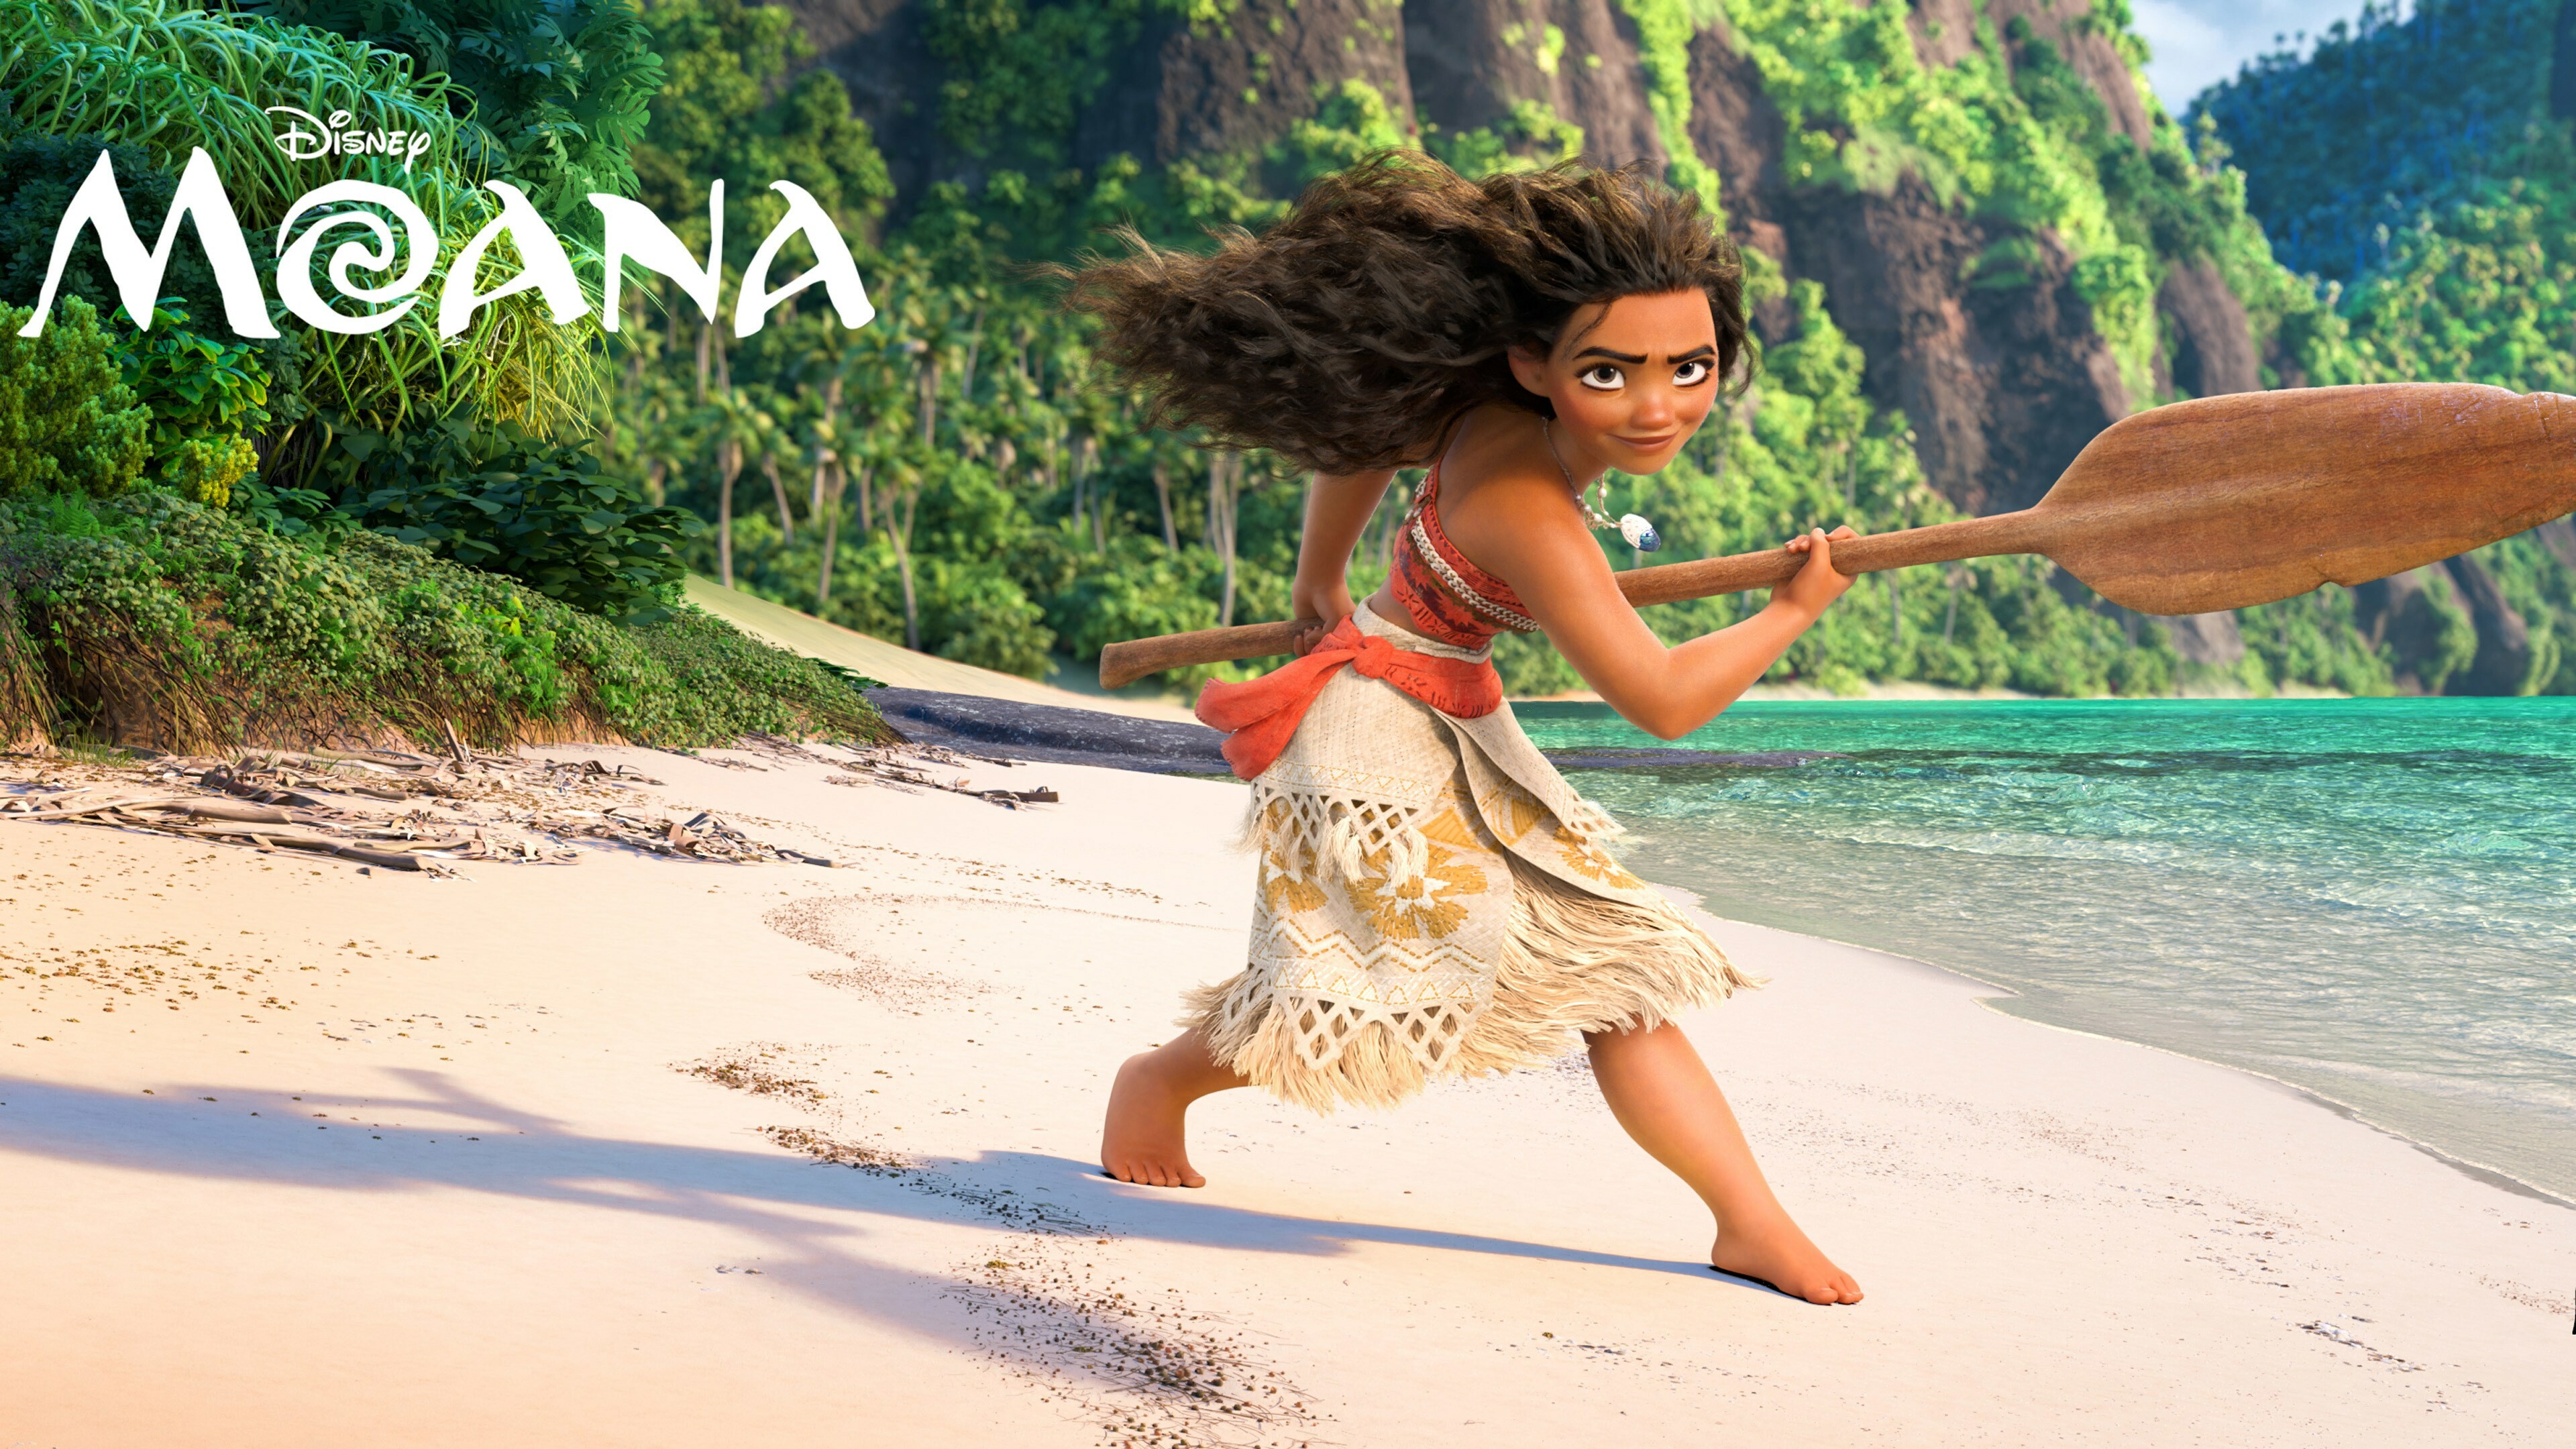 Moana: Disney's animated movie, Directed by John Musker and Ron Clements. 3840x2160 4K Wallpaper.